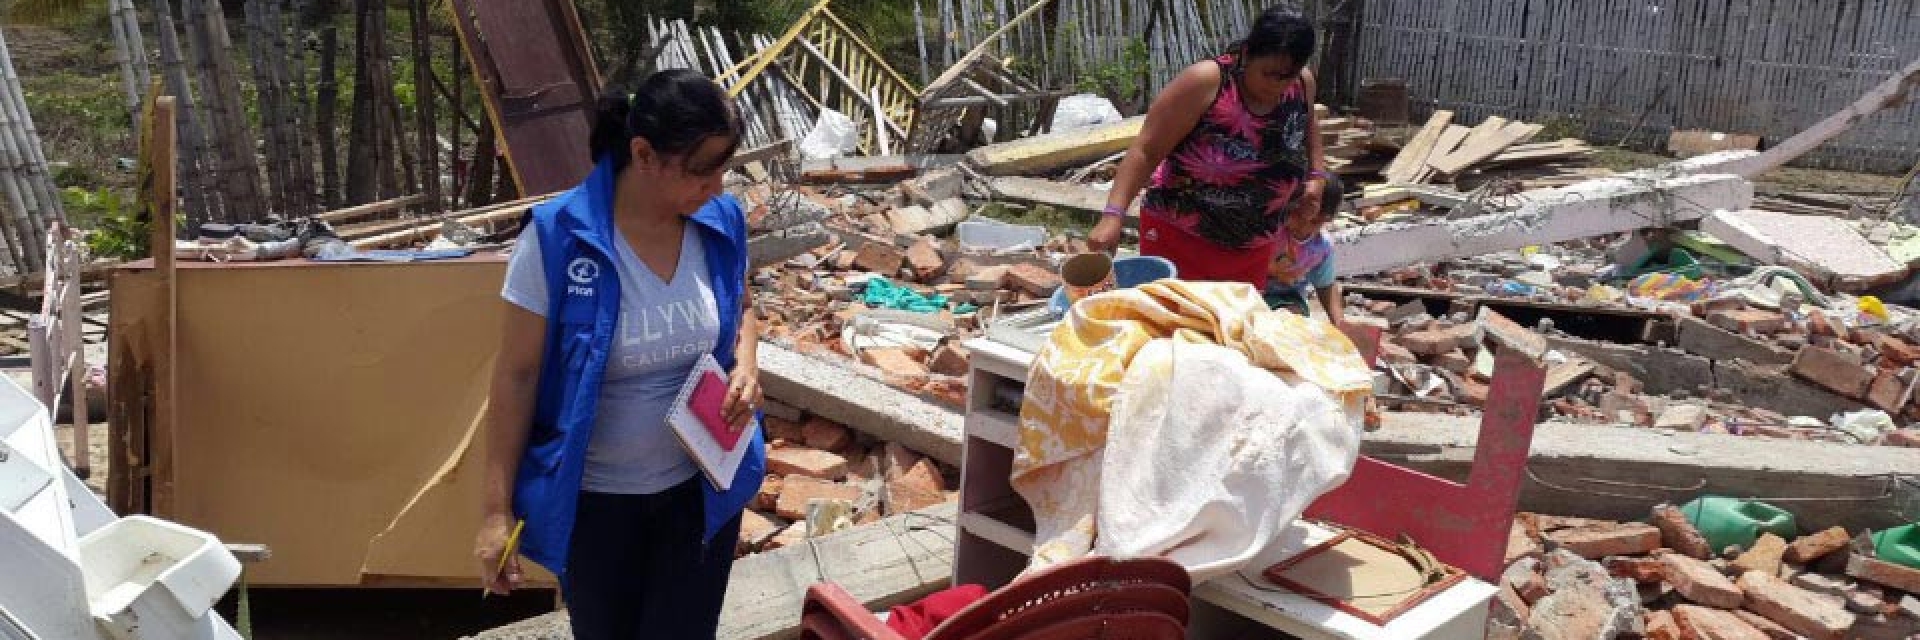 Support for people affected by earthquake in Ecuador